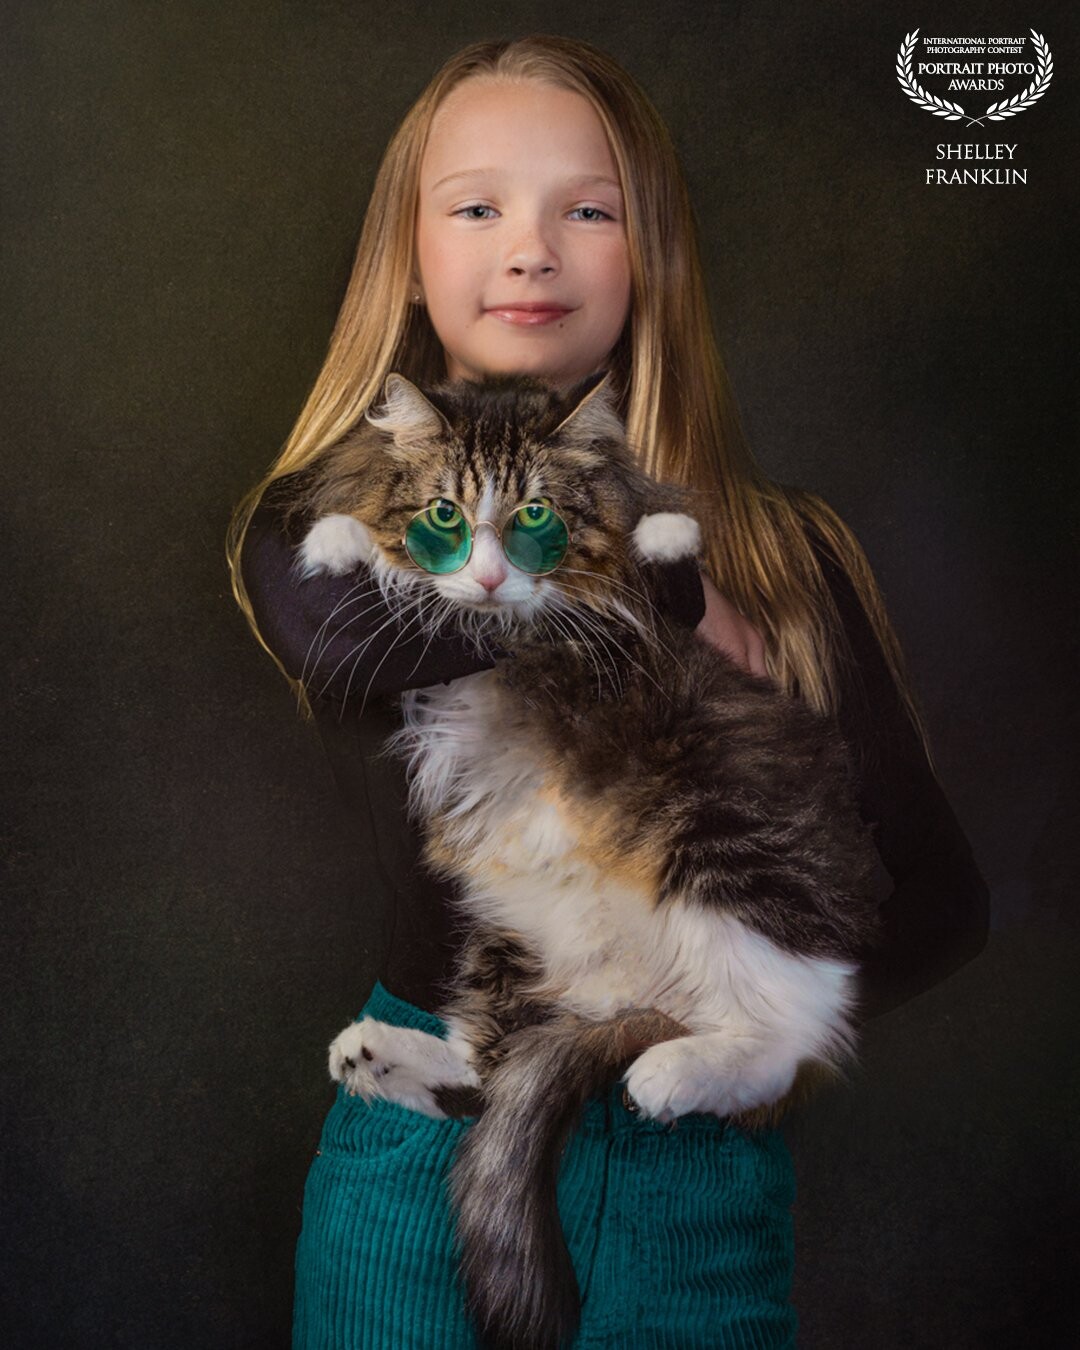 Shot in studio with a canon r5 and profoto d1’s. This little girl rescued her cat Skittles and they have a close bond. The little girls favorite color was the color of her pants so I thought it would be fun to give Skittles glasses that sort  of matched.  She looked very smart in them I think!